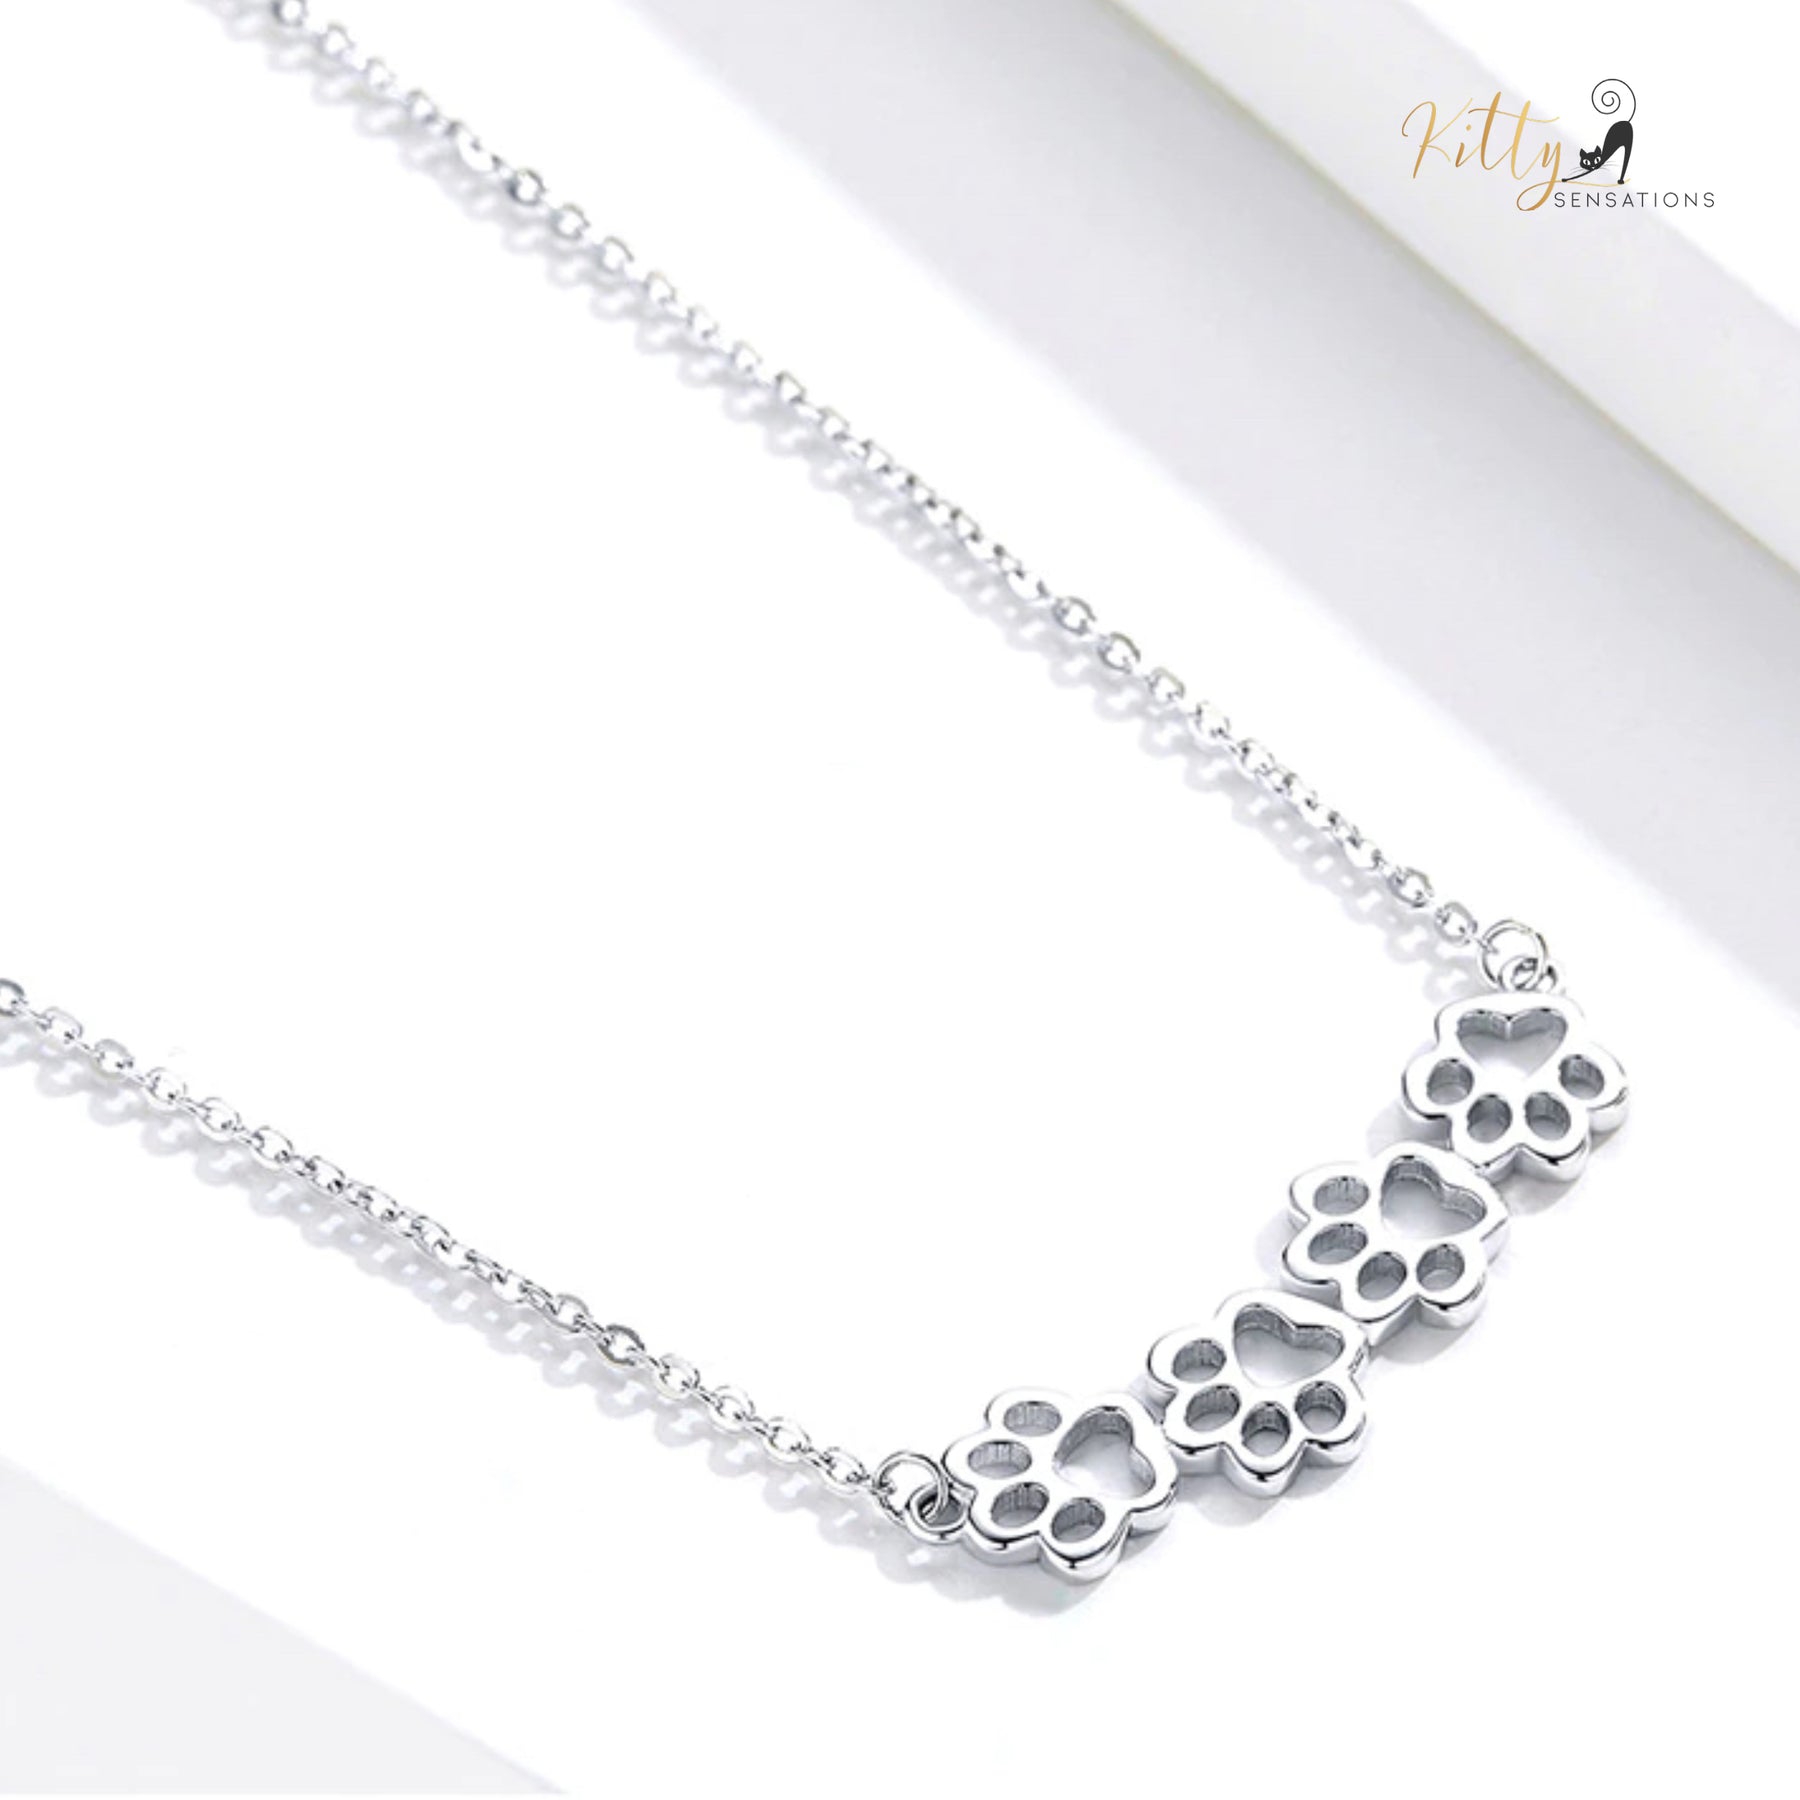 4 Cat Paws Necklace in Solid 925 Sterling Silver - (Platinum Plated)